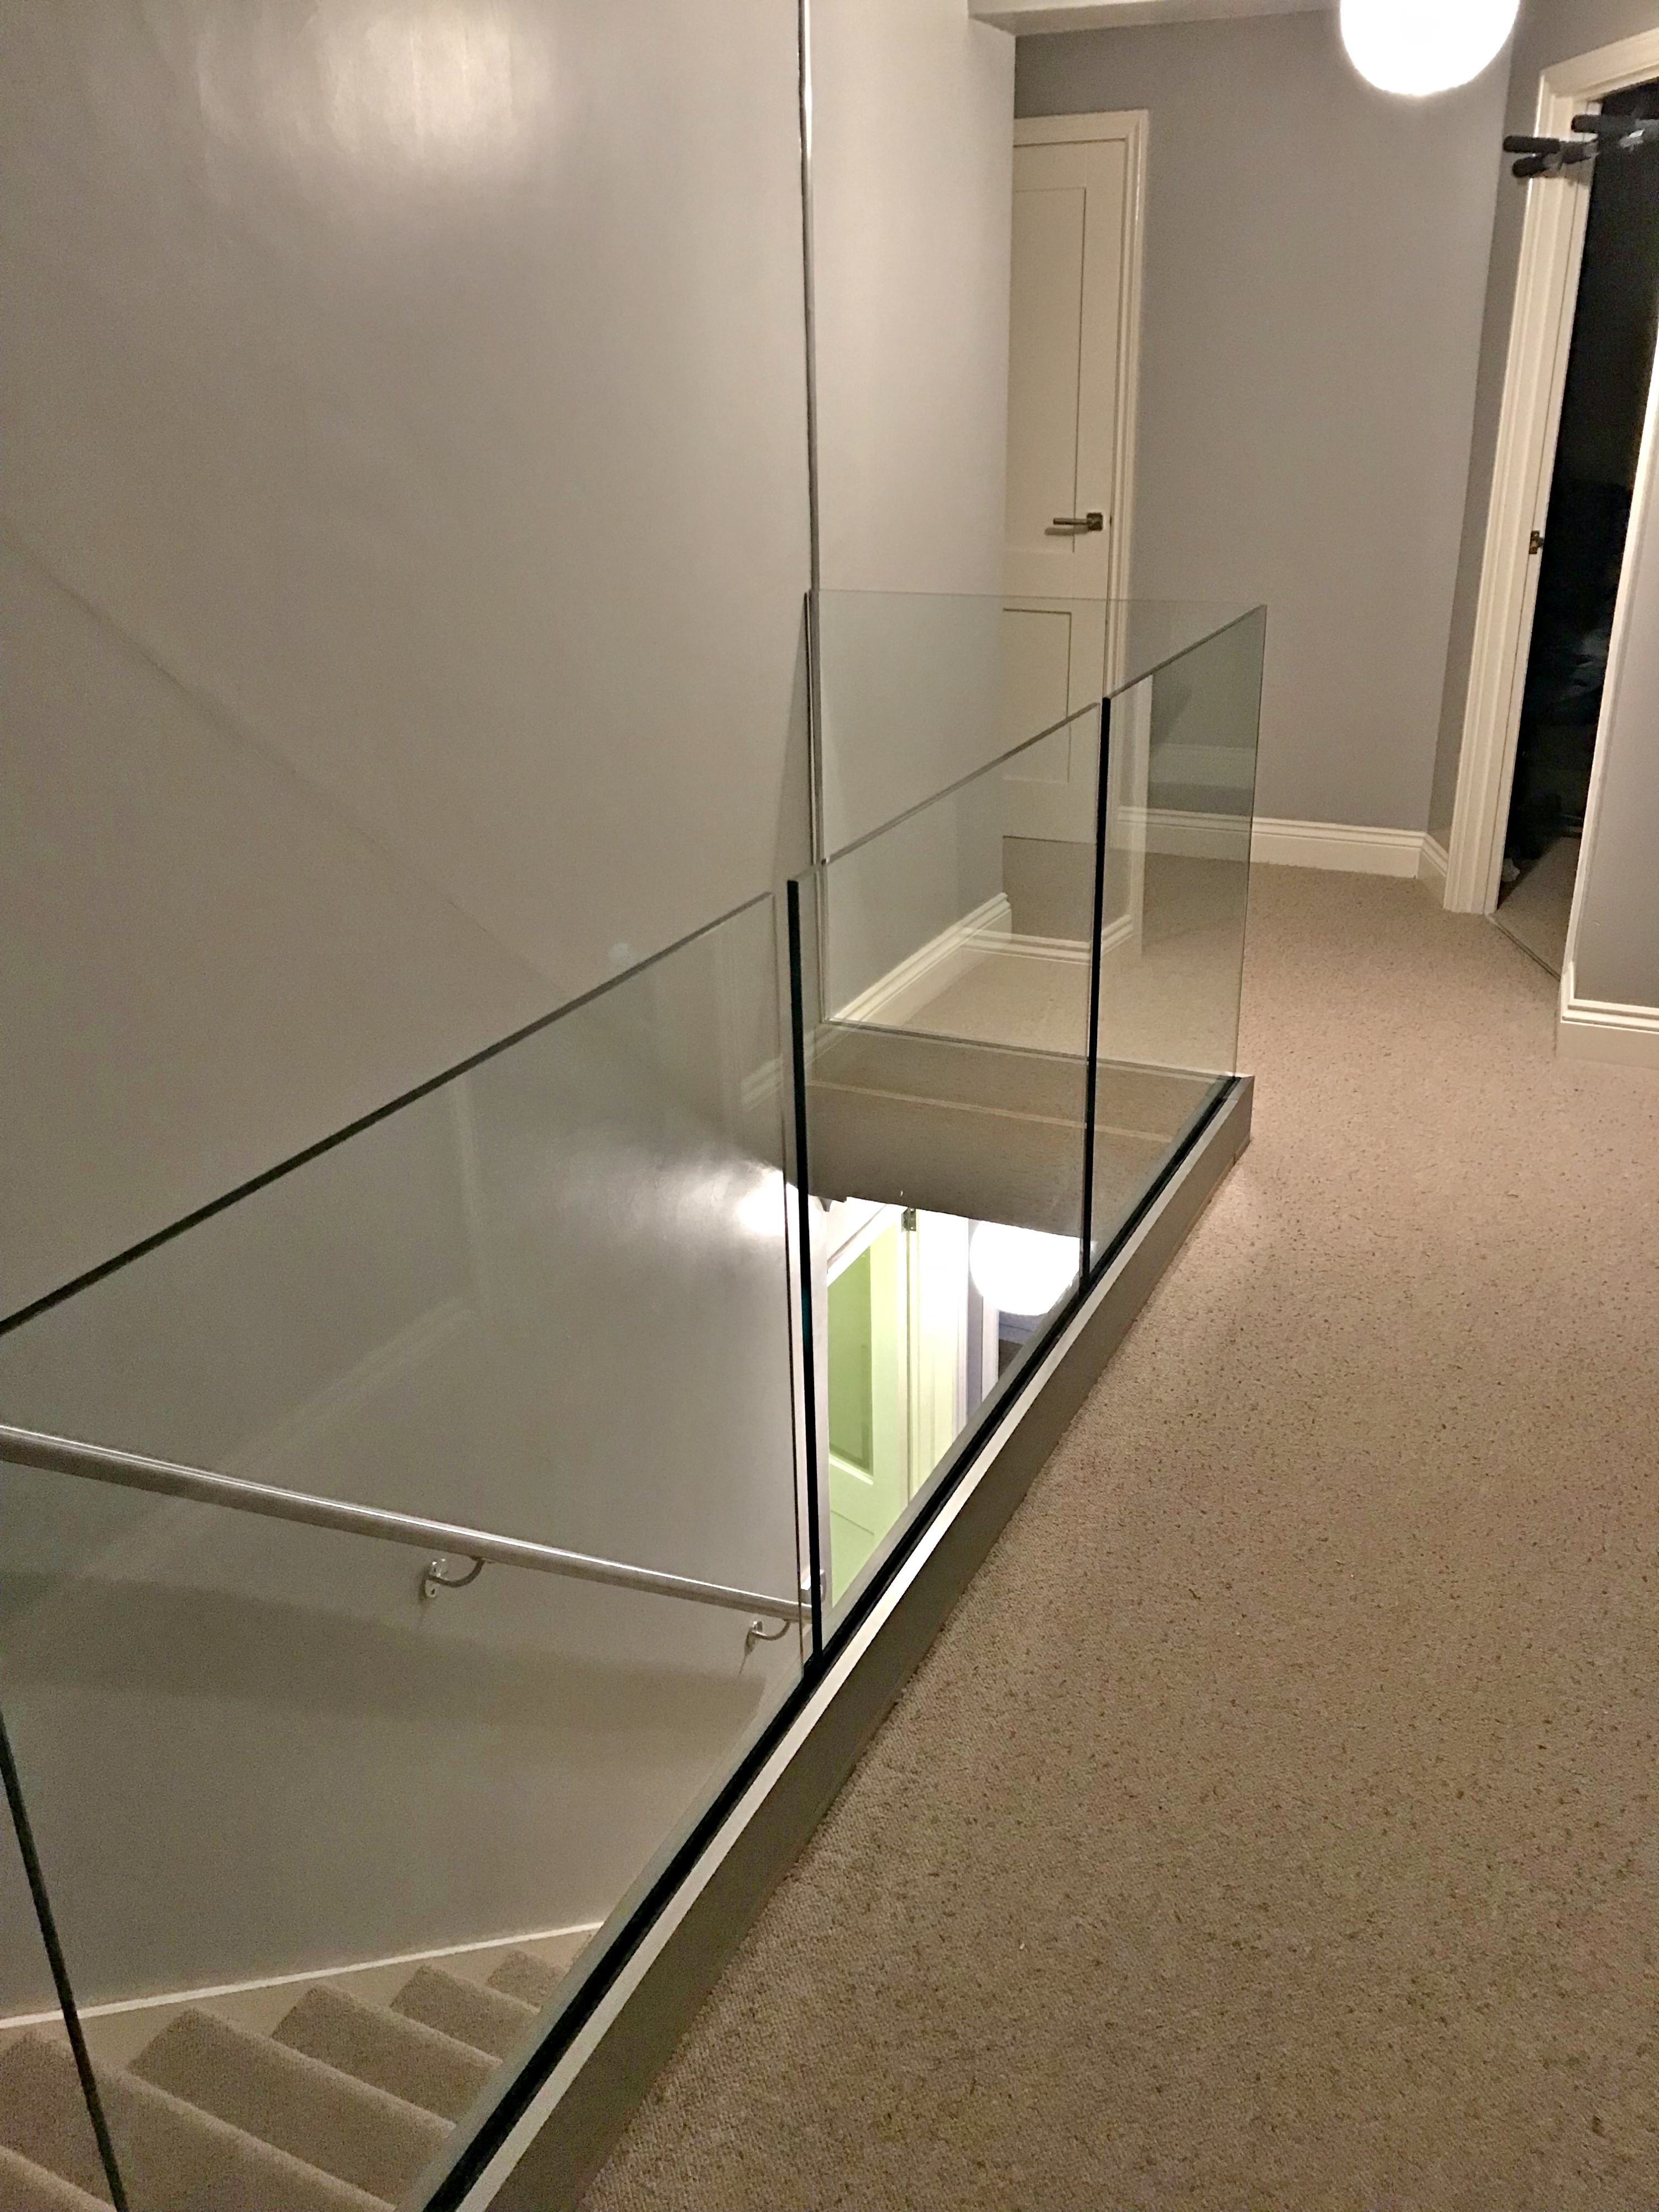 Ken has installed our Solus system on his landing area glass balustrade